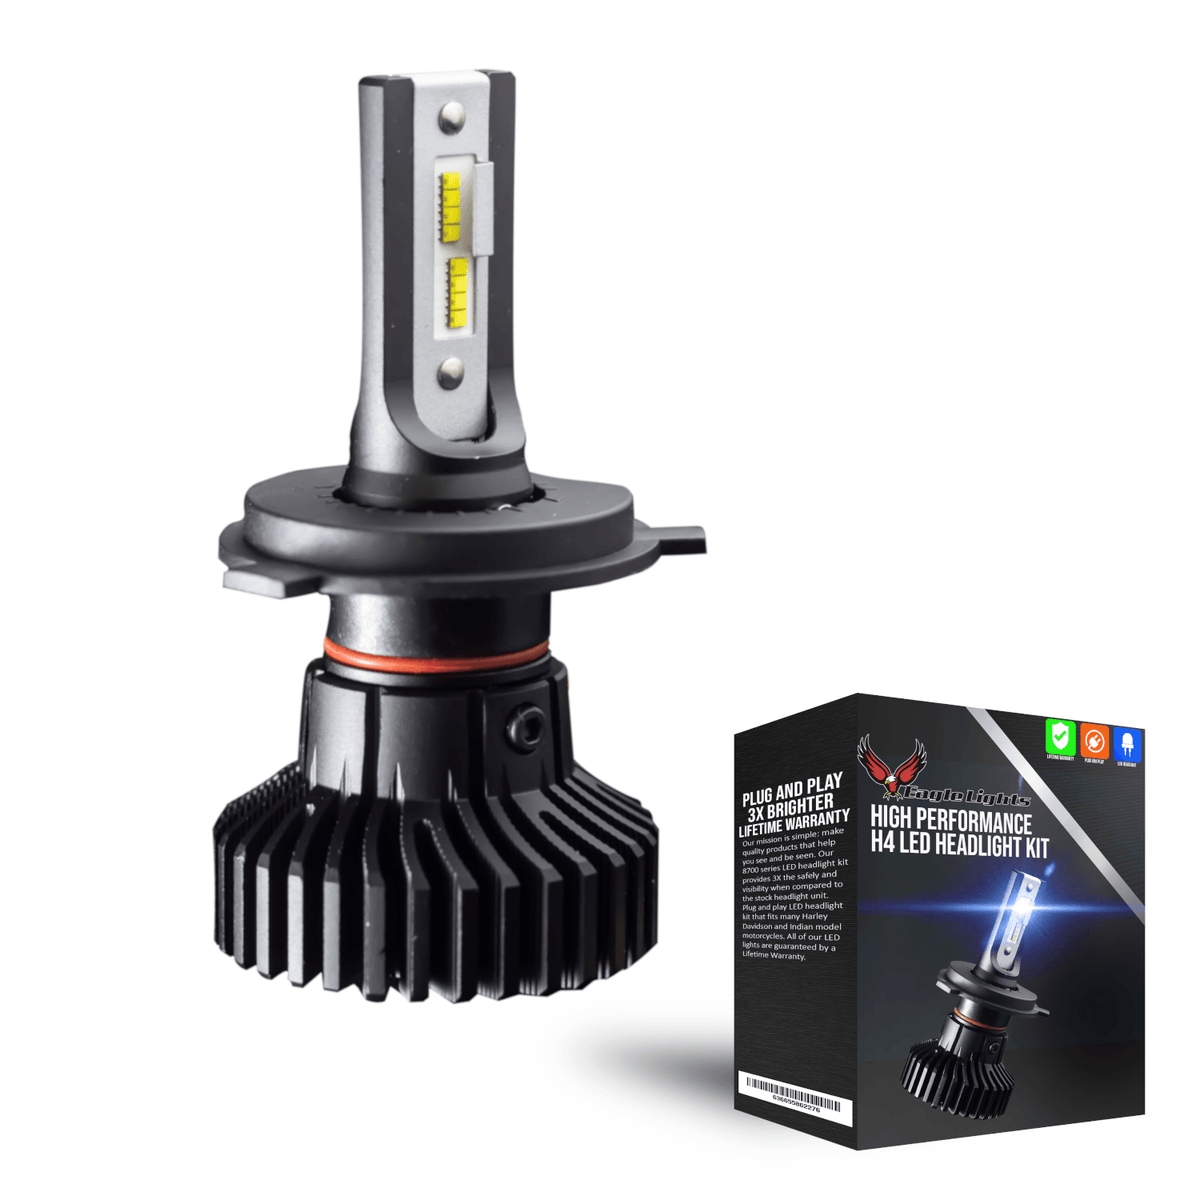 Eagle Lights Infinity Beam H4 LED Headlight Bulb for BMW Motorcycles